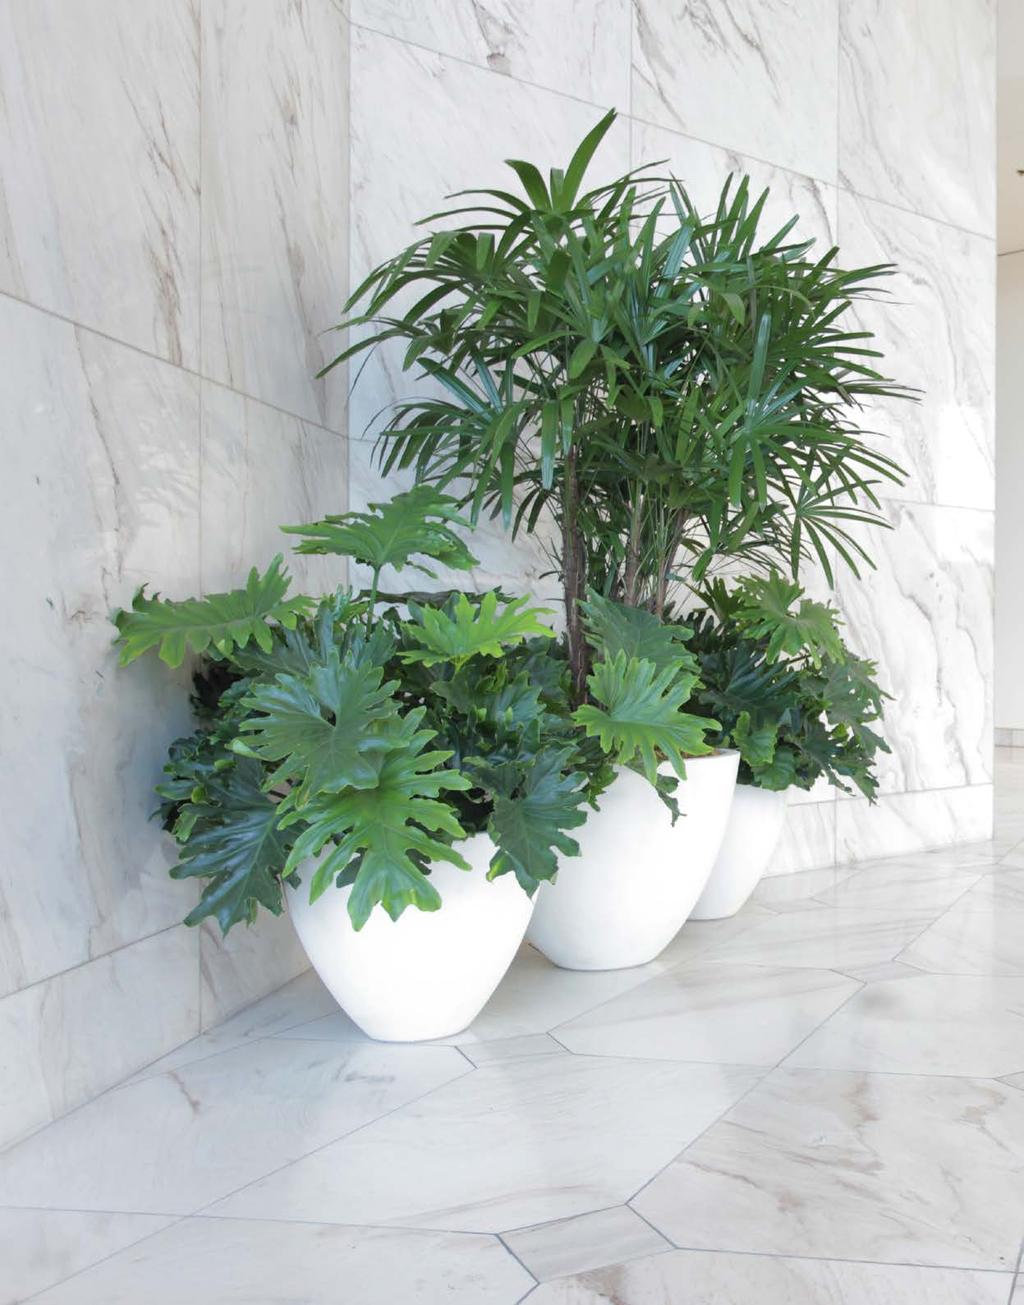 Planters Marcas Sonia Erin Miles L M S 31 in Dia x 23 in H 24 in Dia x 19 in H 22 in Dia x 14 in H Marcas Planters / S, M / Chalk / Standard finish We ve designed our planters to be simple